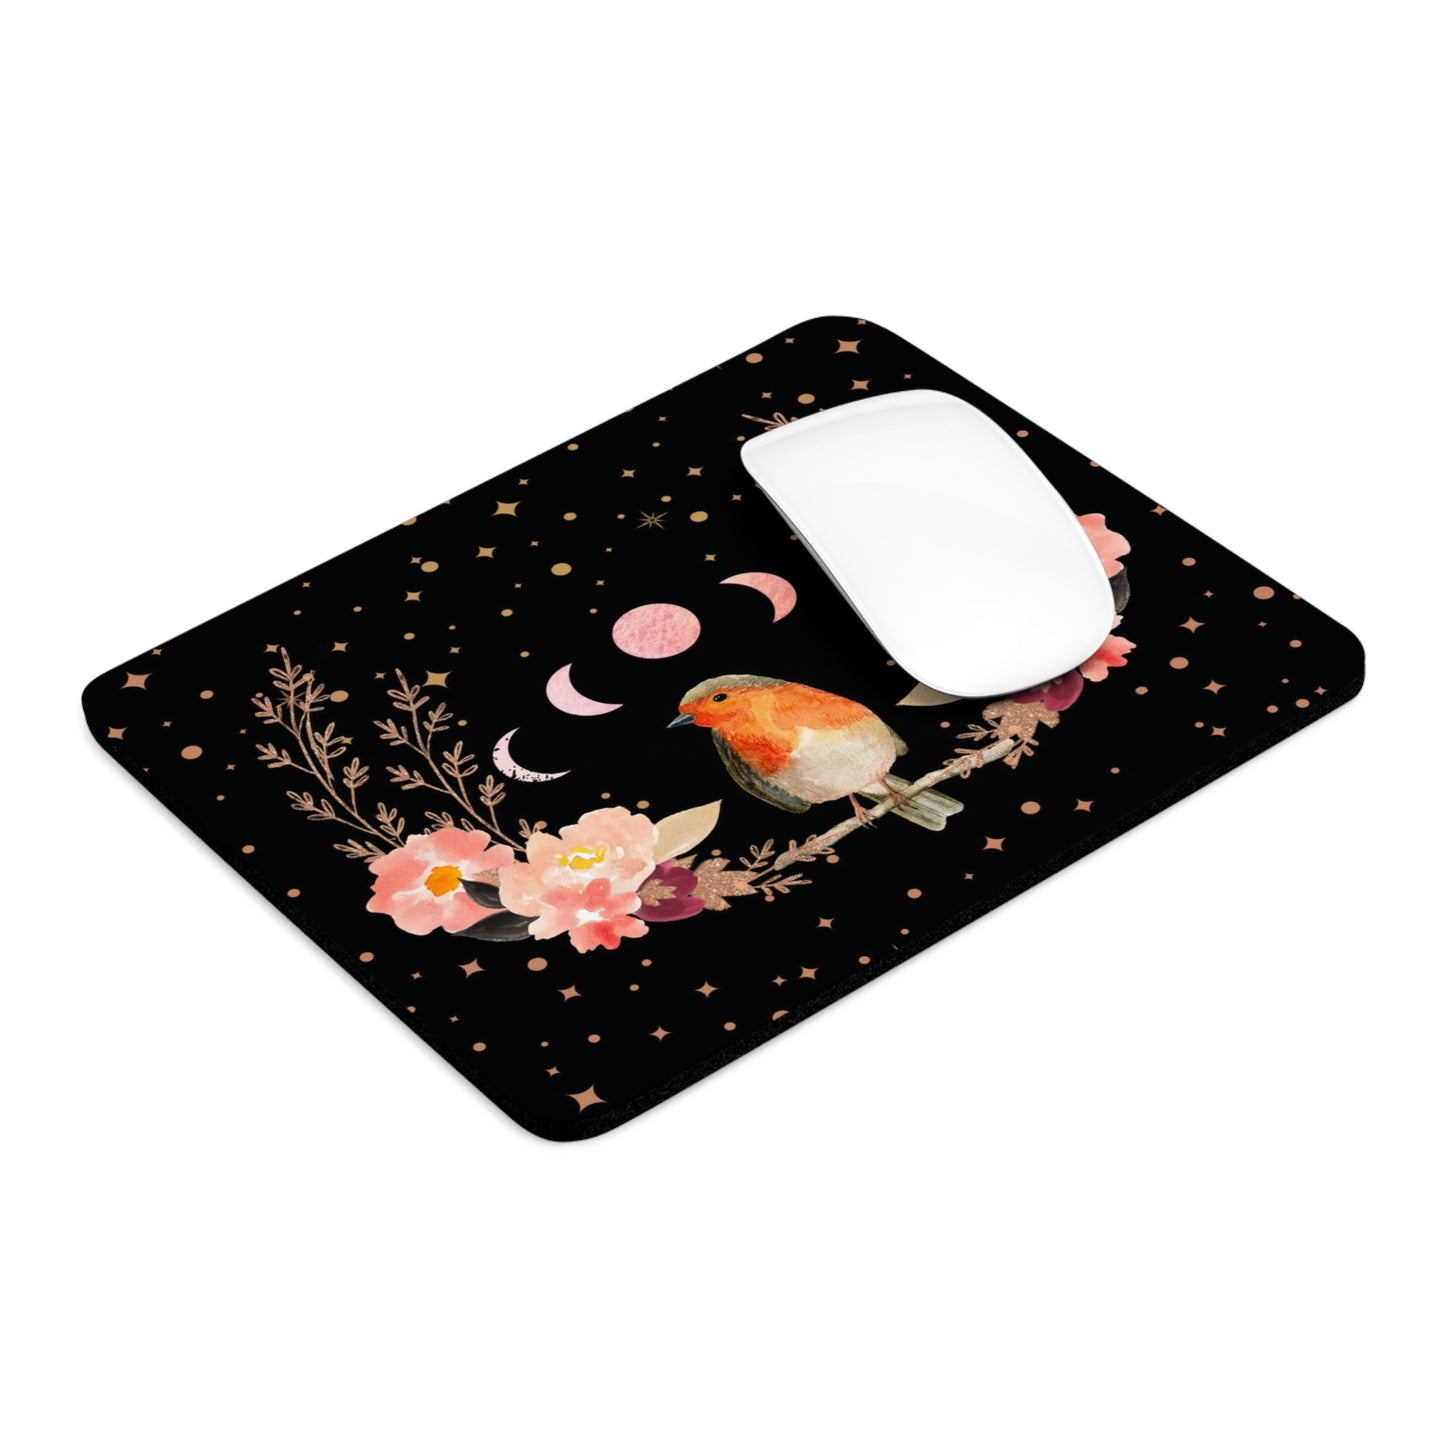 Orange Songbird Peach Flowers Mouse Pad (Round or Rectangle) Cute Floral Office Accessories